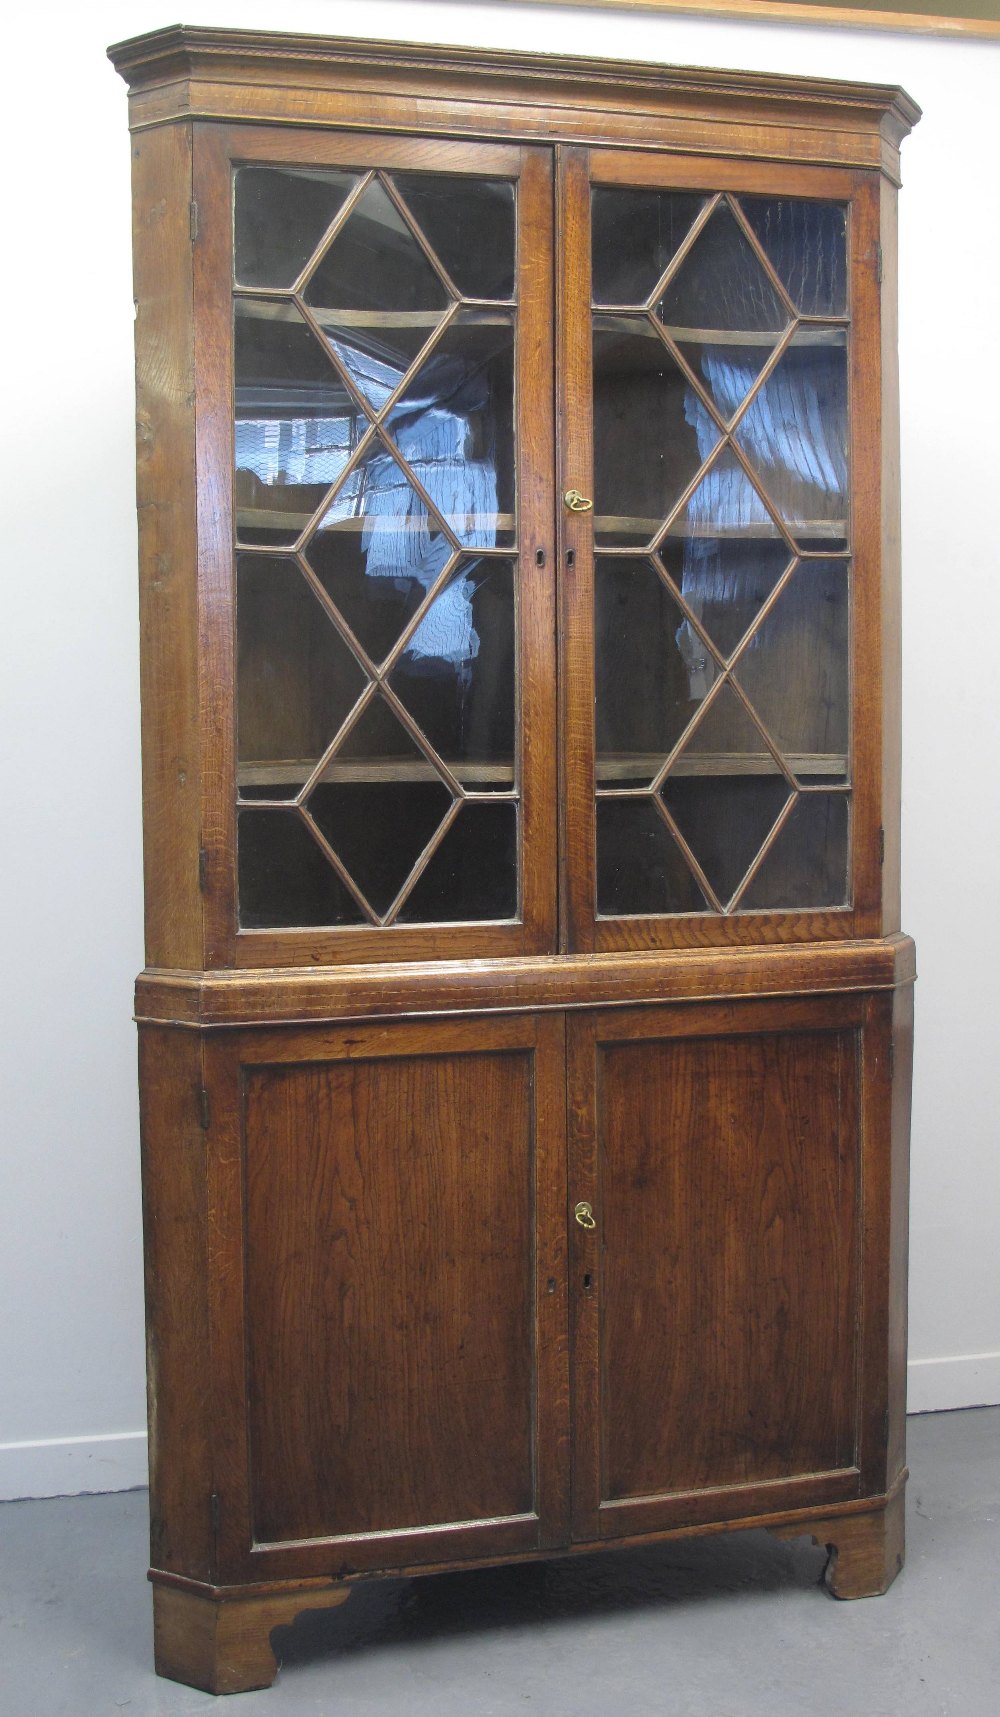 EARLY 19TH CENTURY WELSH OAK DOUBLE CORNER CABINET, having moulded and geometrically inlaid frieze